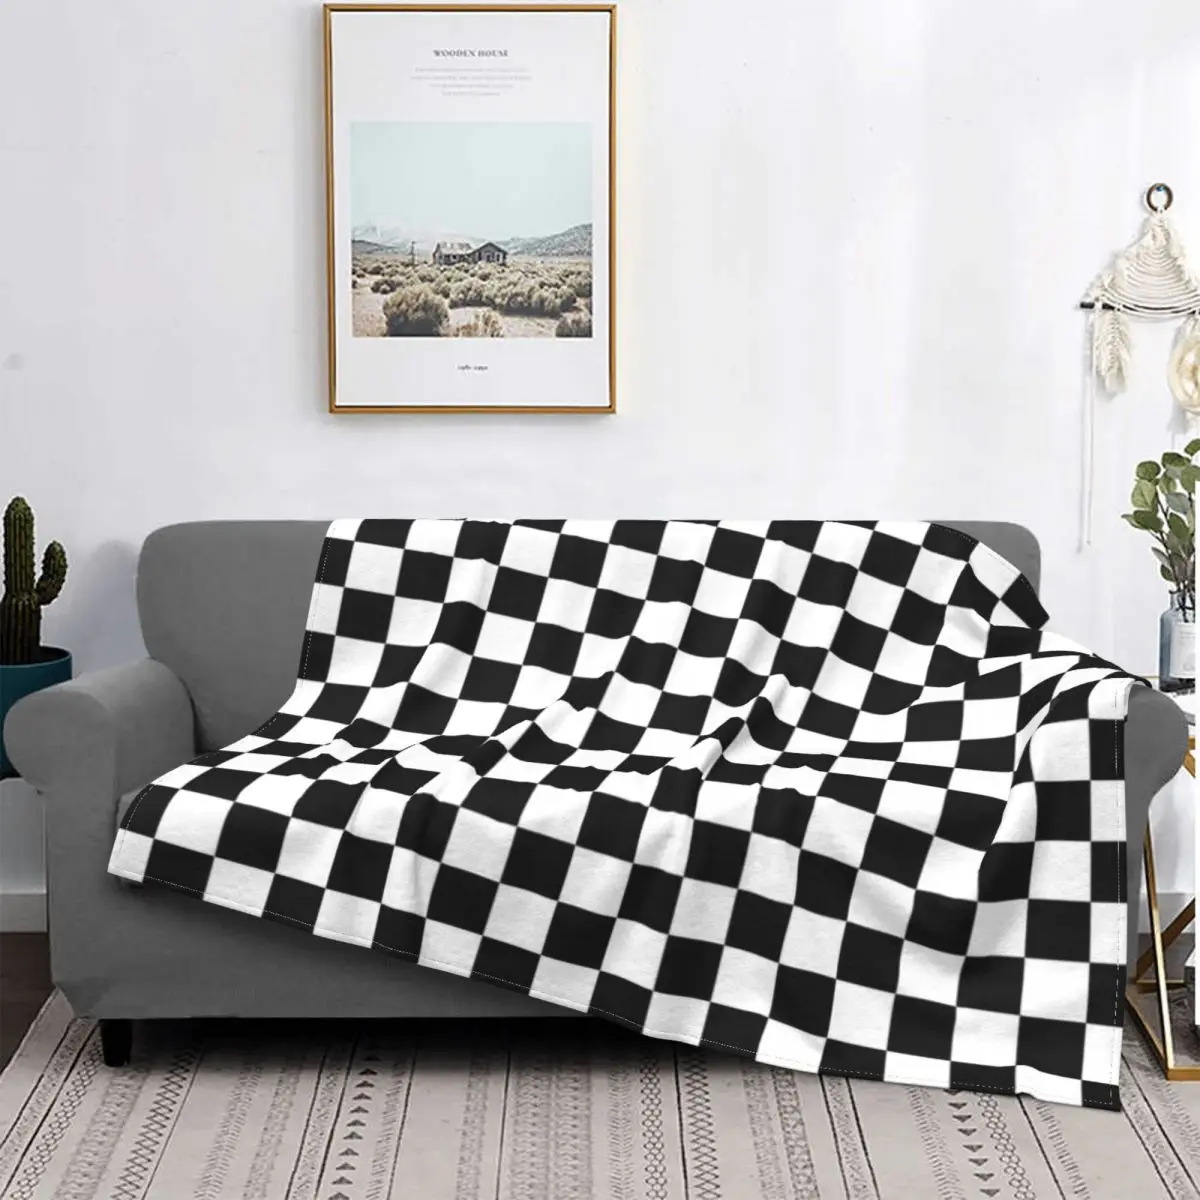 

White And Black Checkerboard Blanket Bedspread Bed Plaid Blanket Beach Cover Muslin Blanket Blankets For Beds